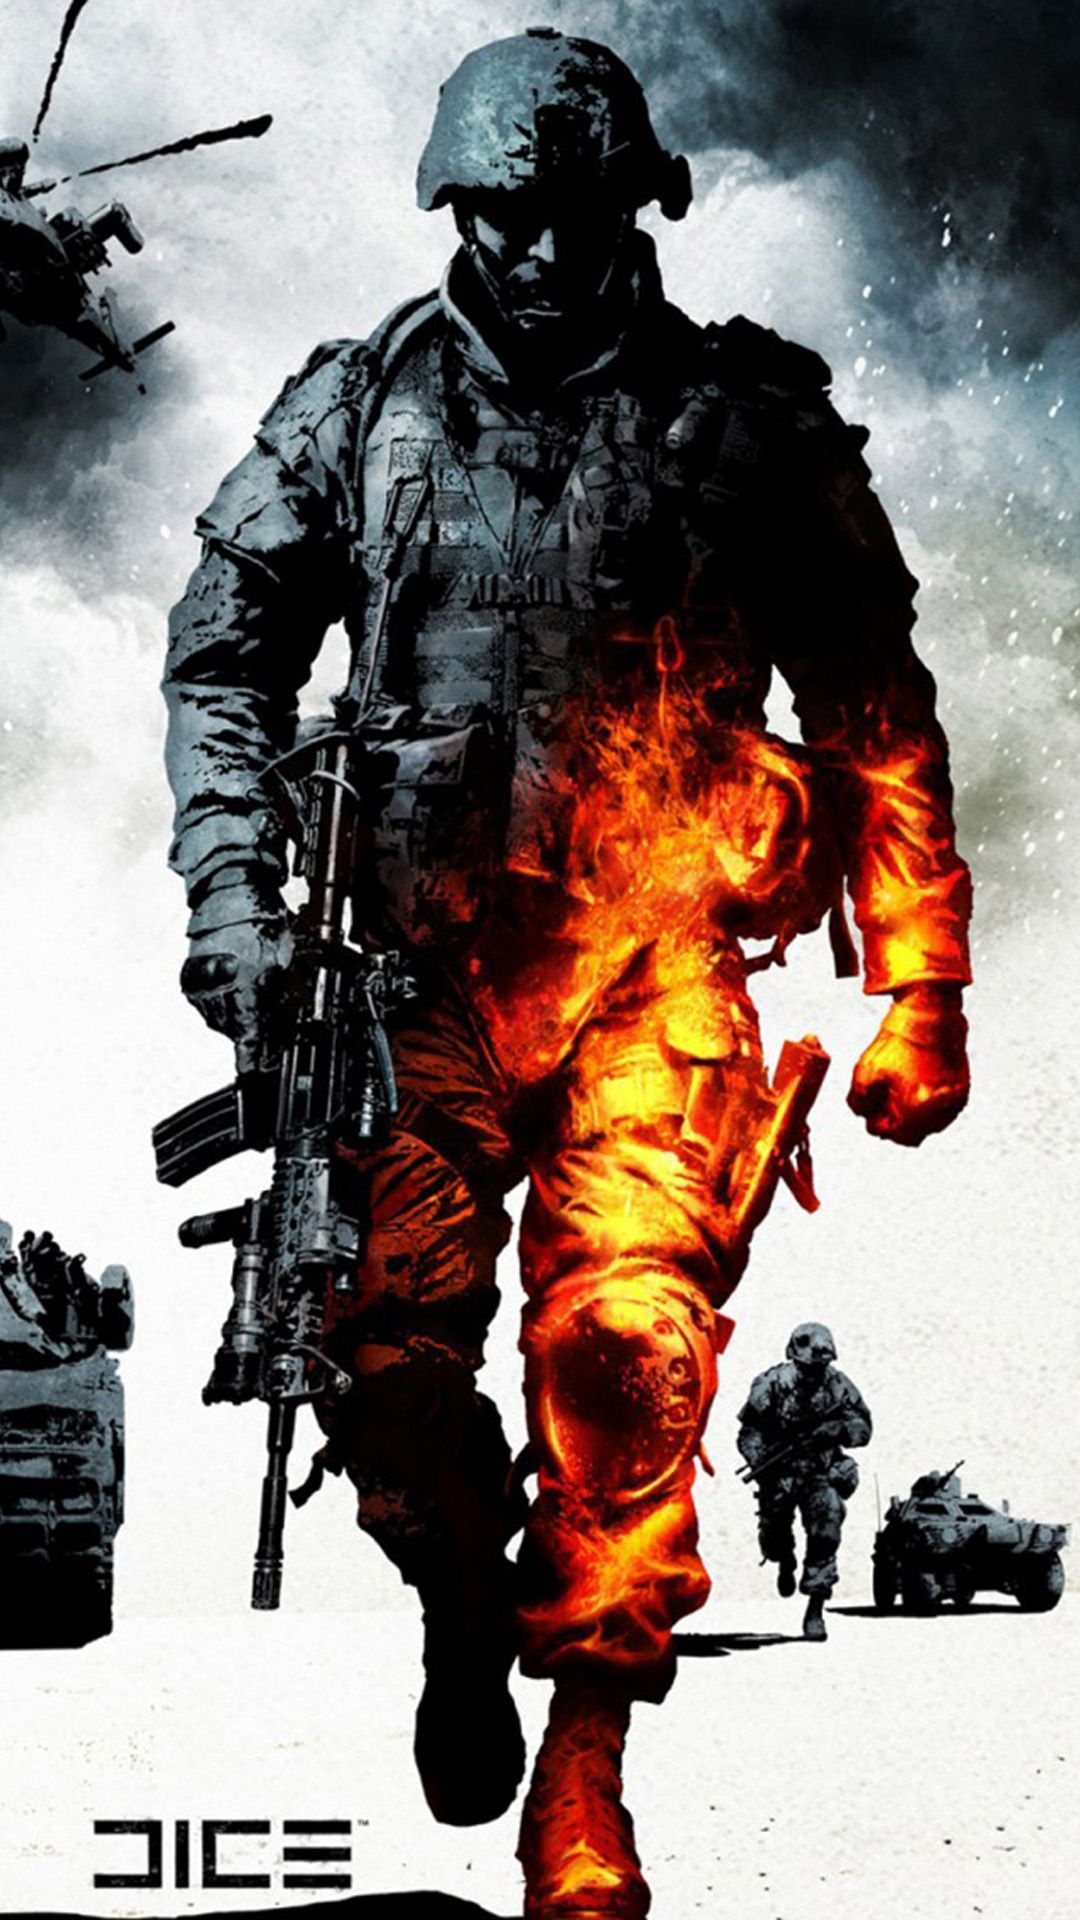 Military Burning Soldier IPhone 6 Wallpaper Download. IPhone Wallpaper, IPad Wallpaper One Stop Download. Indian Army Wallpaper, Army Wallpaper, Army Pics